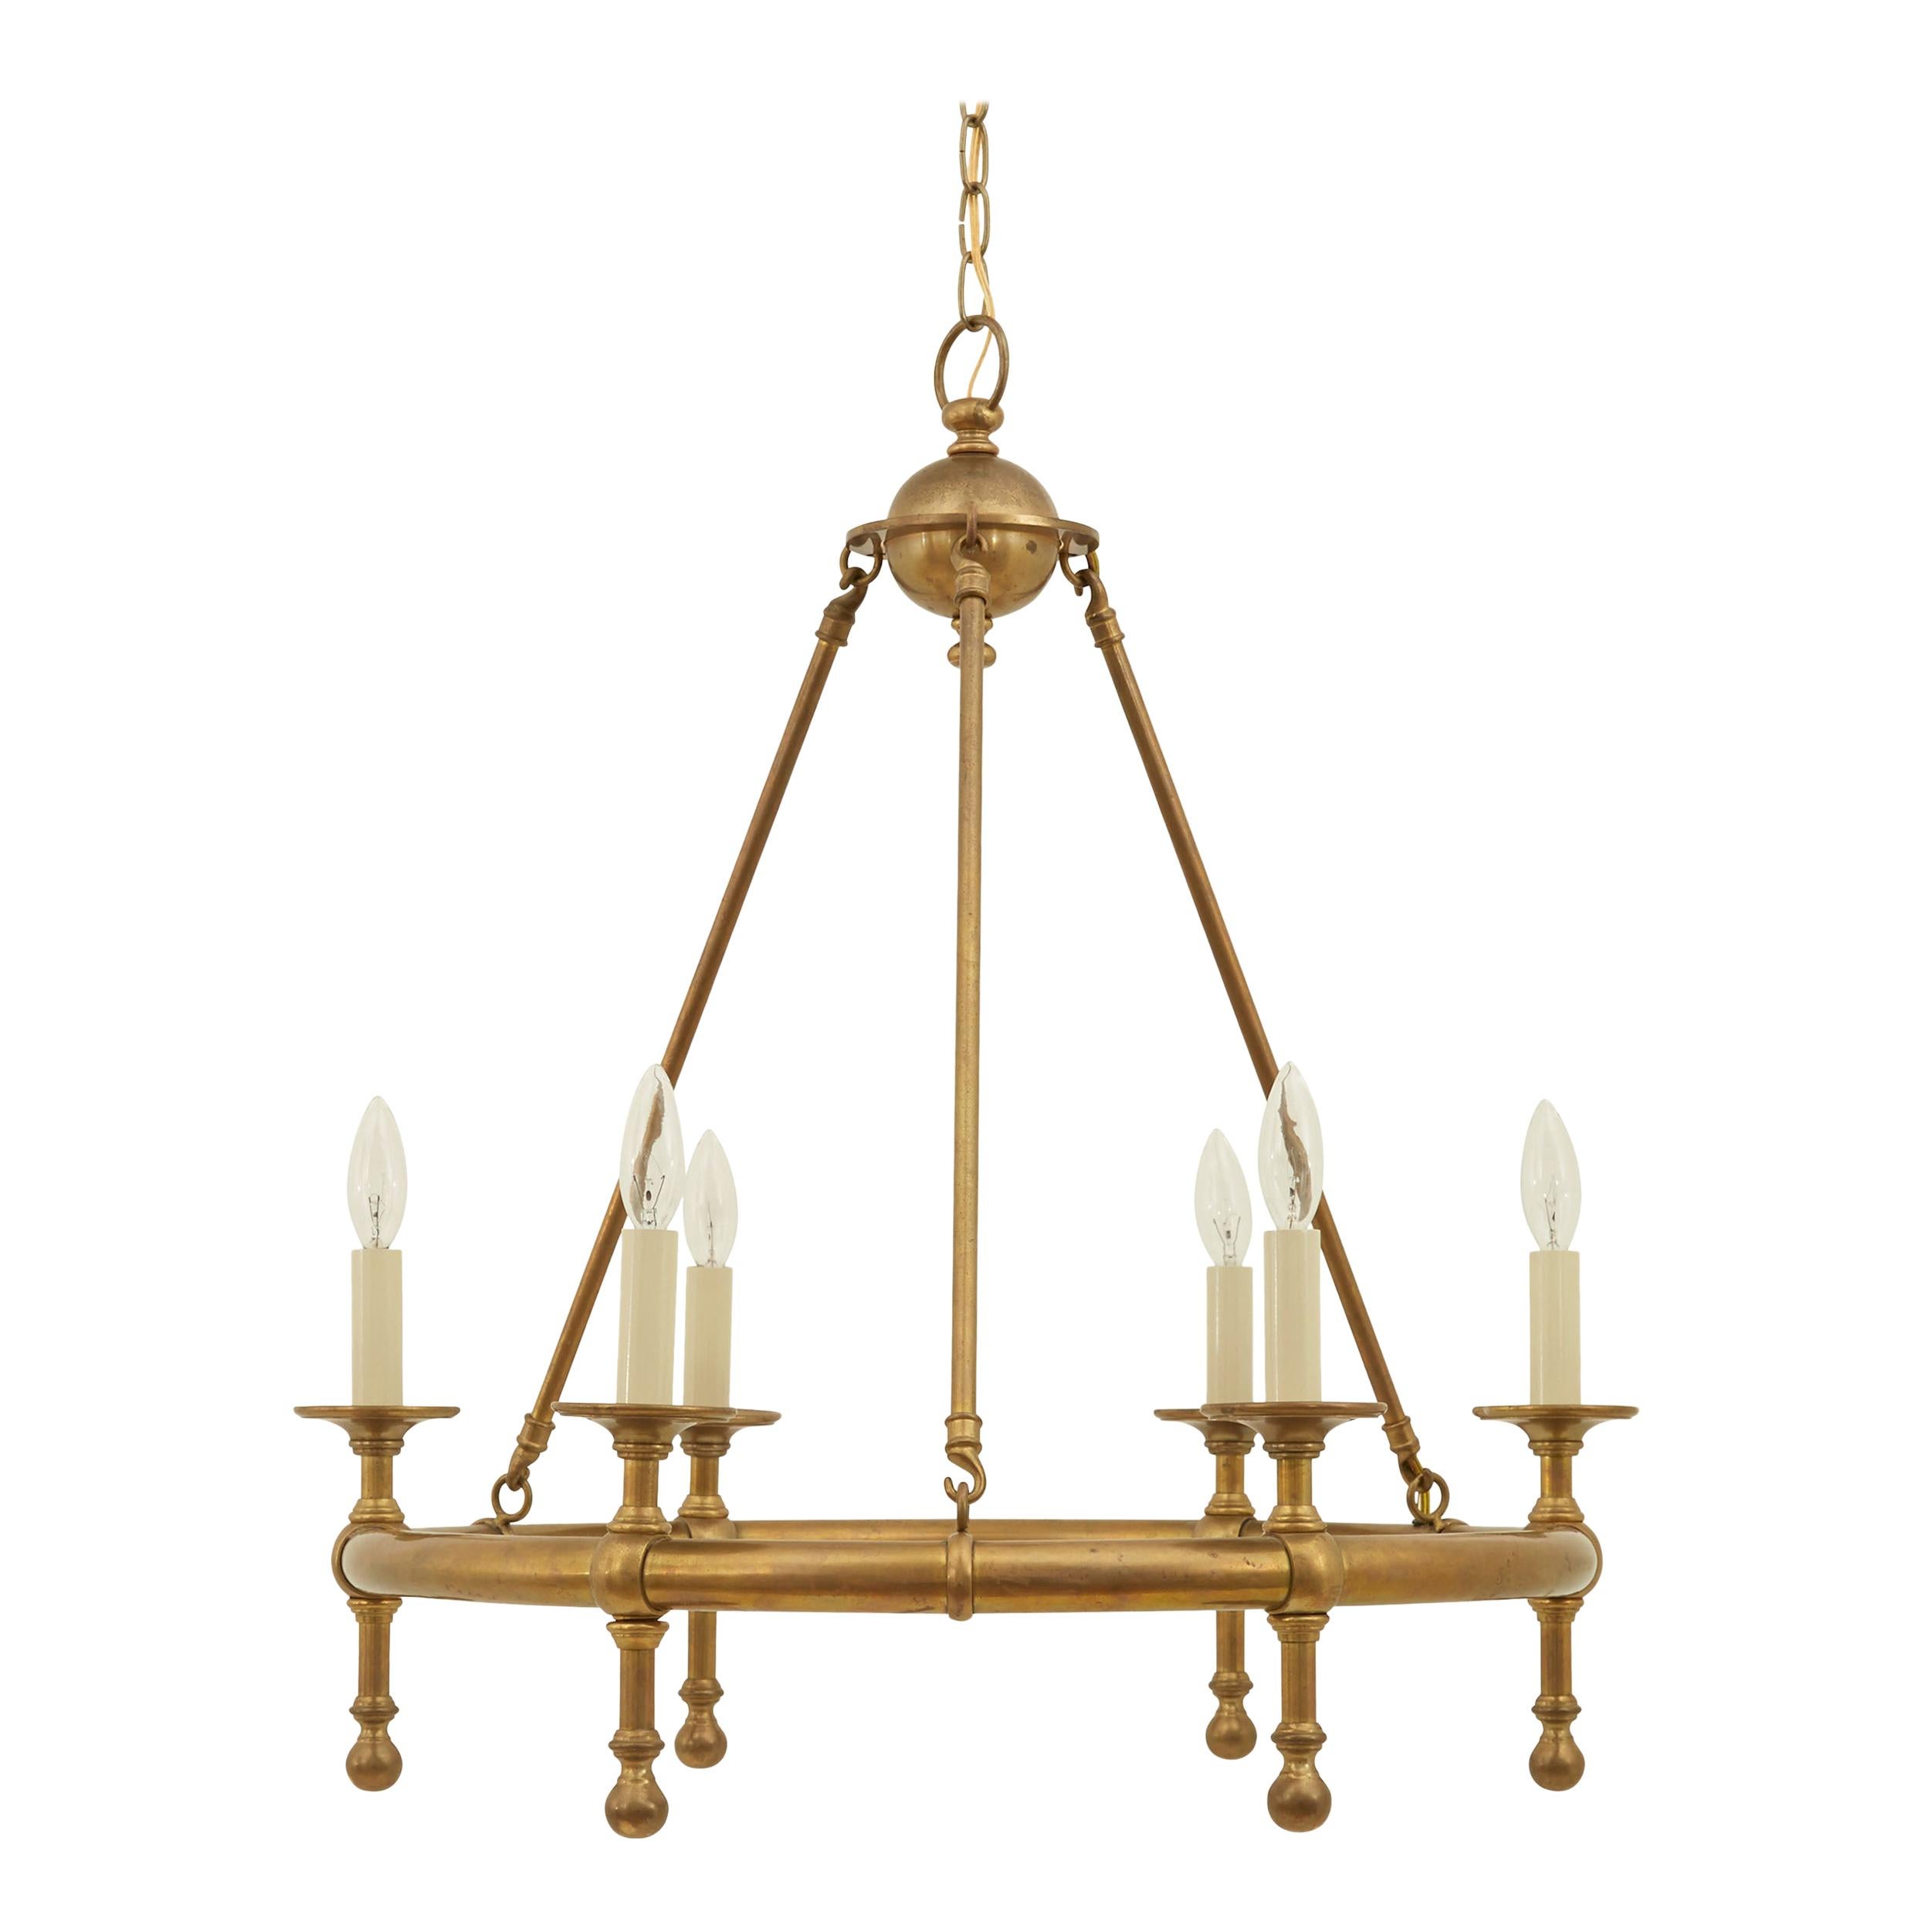 Round Brass Candle-Style Chandelier